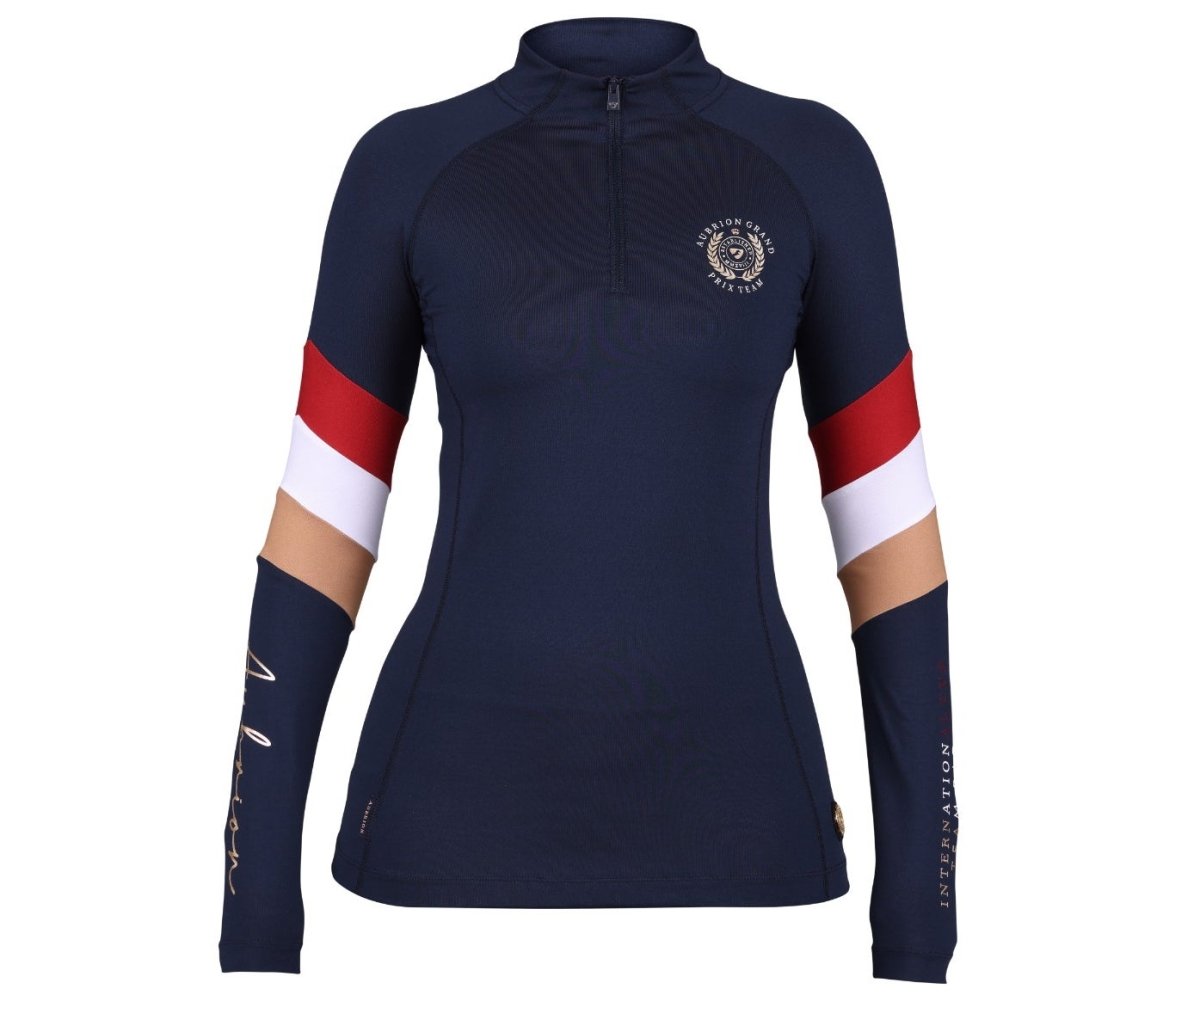 Aubrion AW23 Team Winter Baselayer - Navy - Extra Smaill